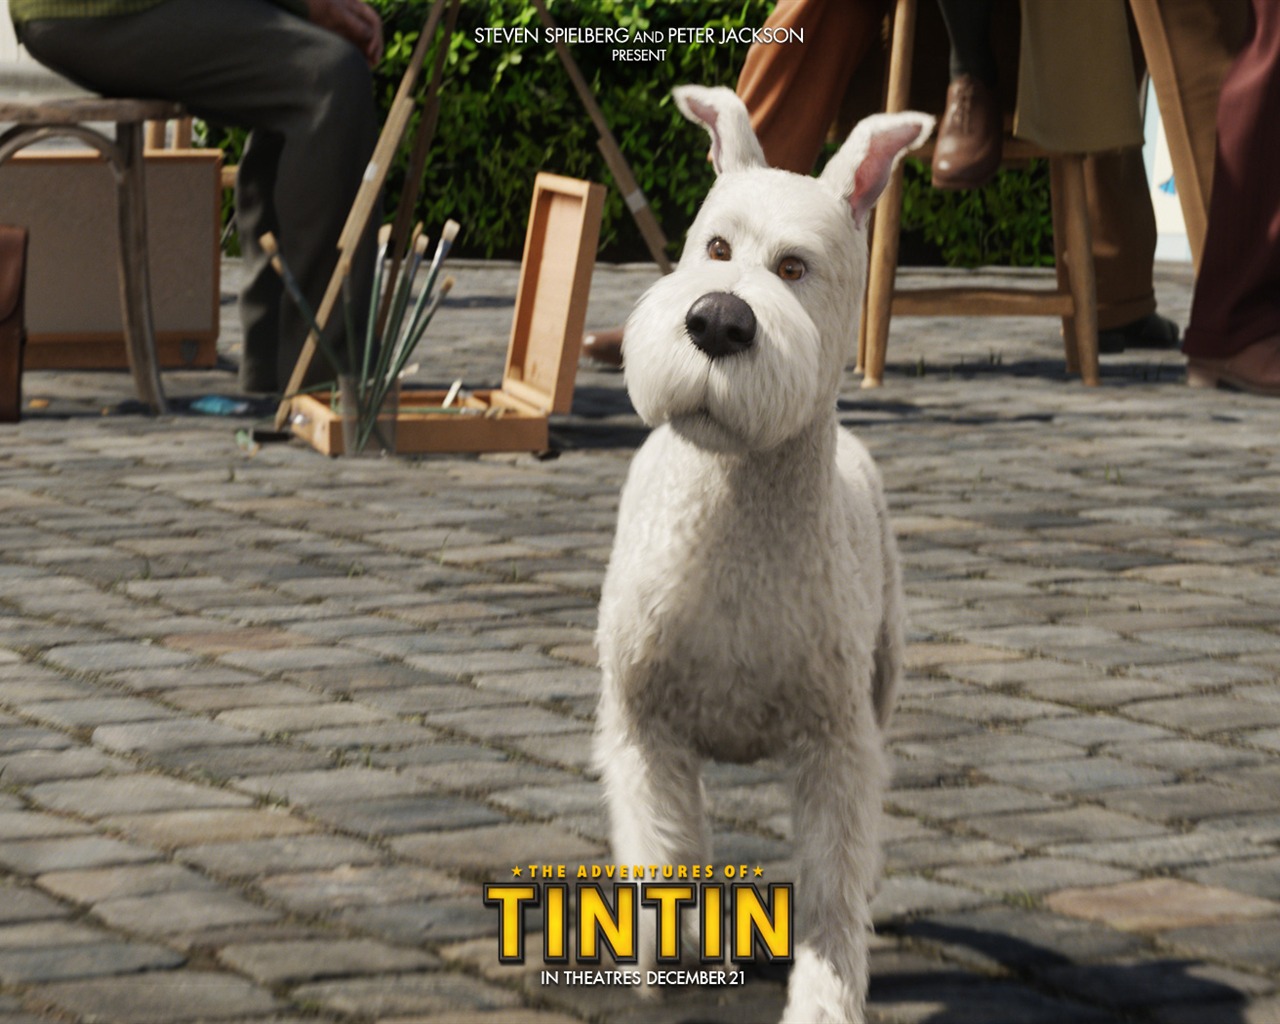 The Adventures of Tintin HD Wallpapers #2 - 1280x1024